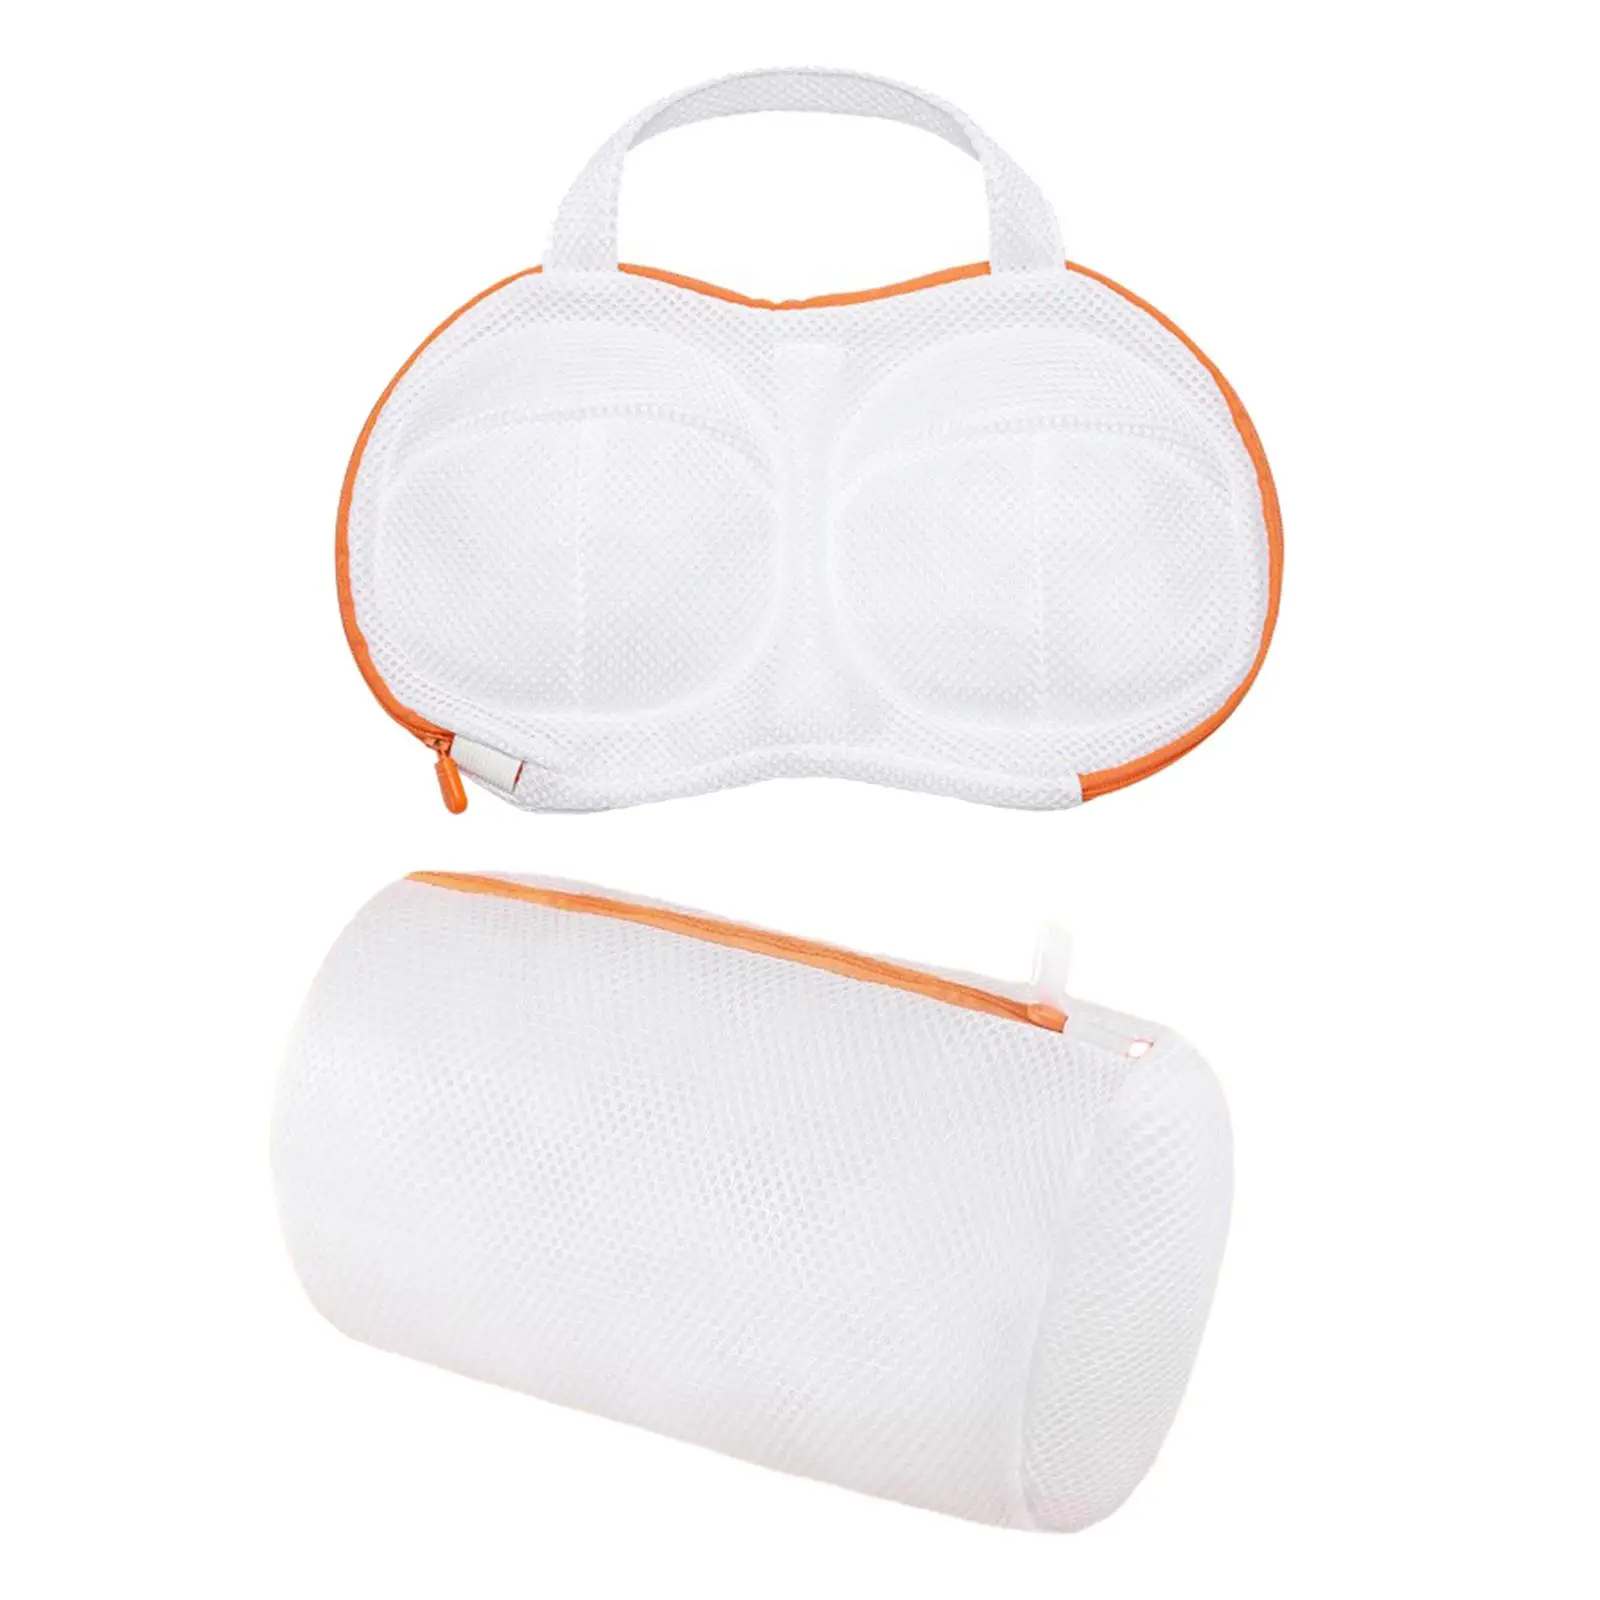 Mesh Laundry Washing Bags Protective Organizer with Zipper Washing Machine Wash Bag for Underwear Home Travel Bra Lingerie